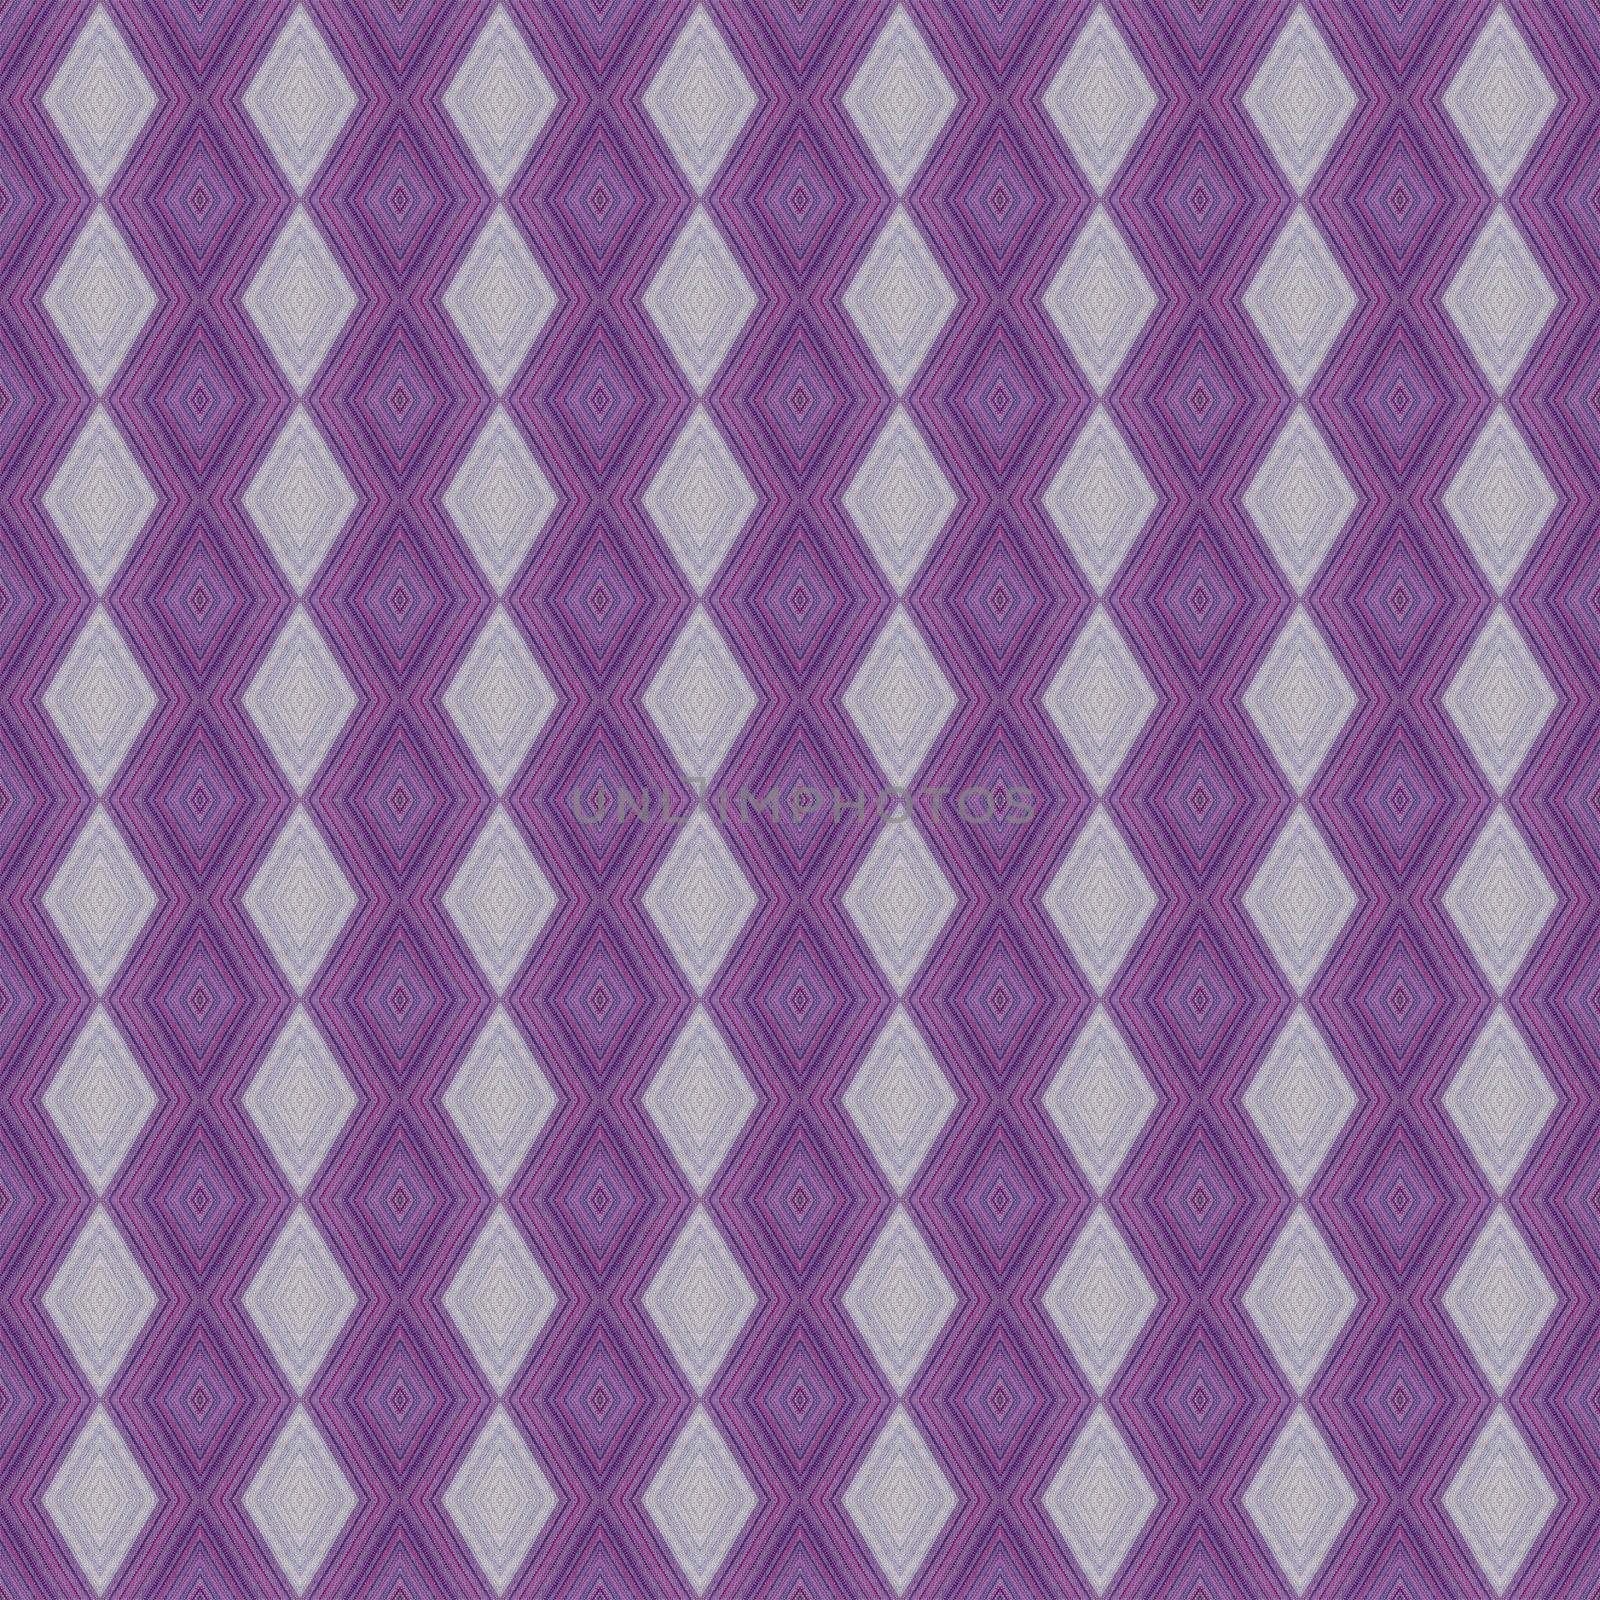 Seamless loincloth pattern background